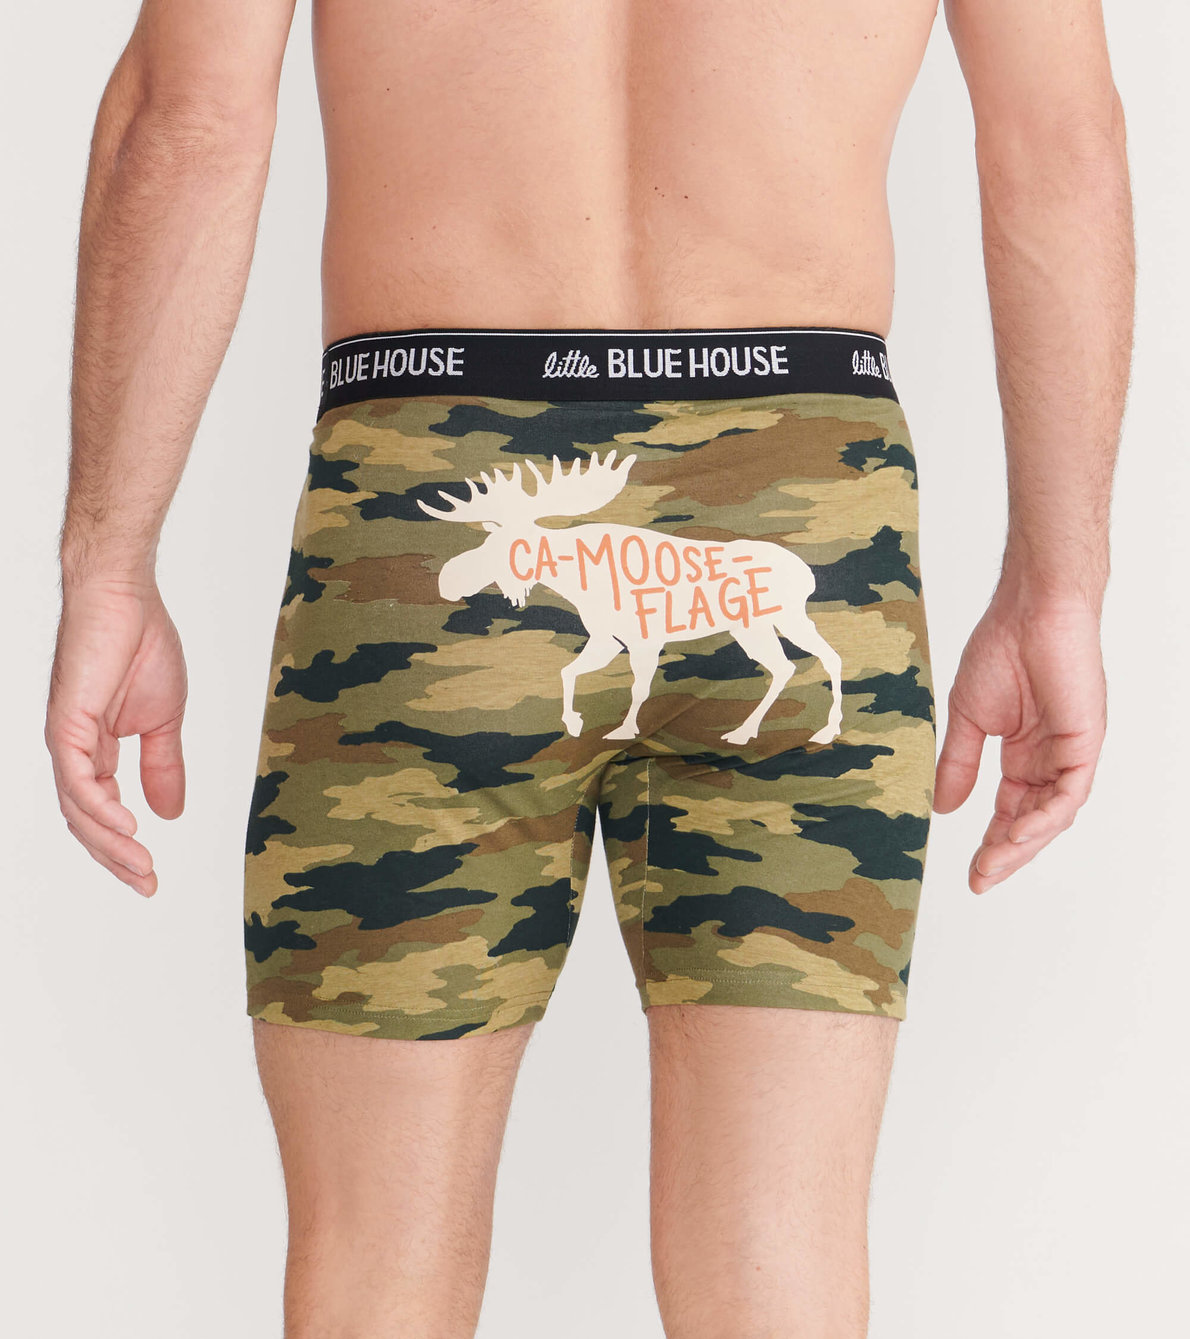 View larger image of Camooseflage Men's Boxer Briefs